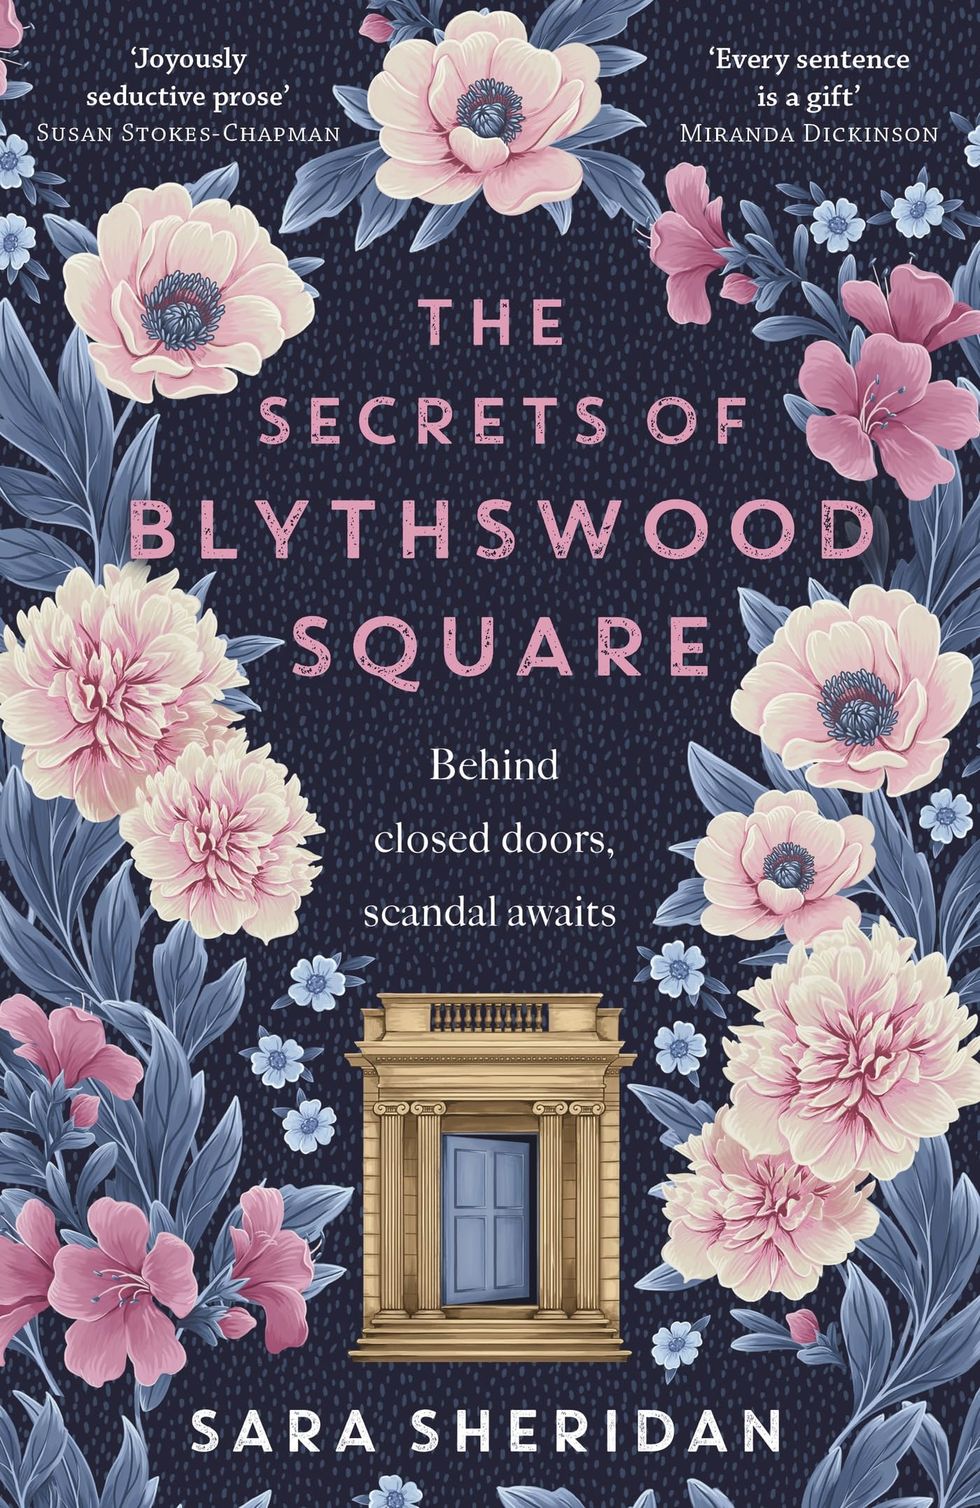 The Secrets Of Blythswood Square by Sara Sheridan